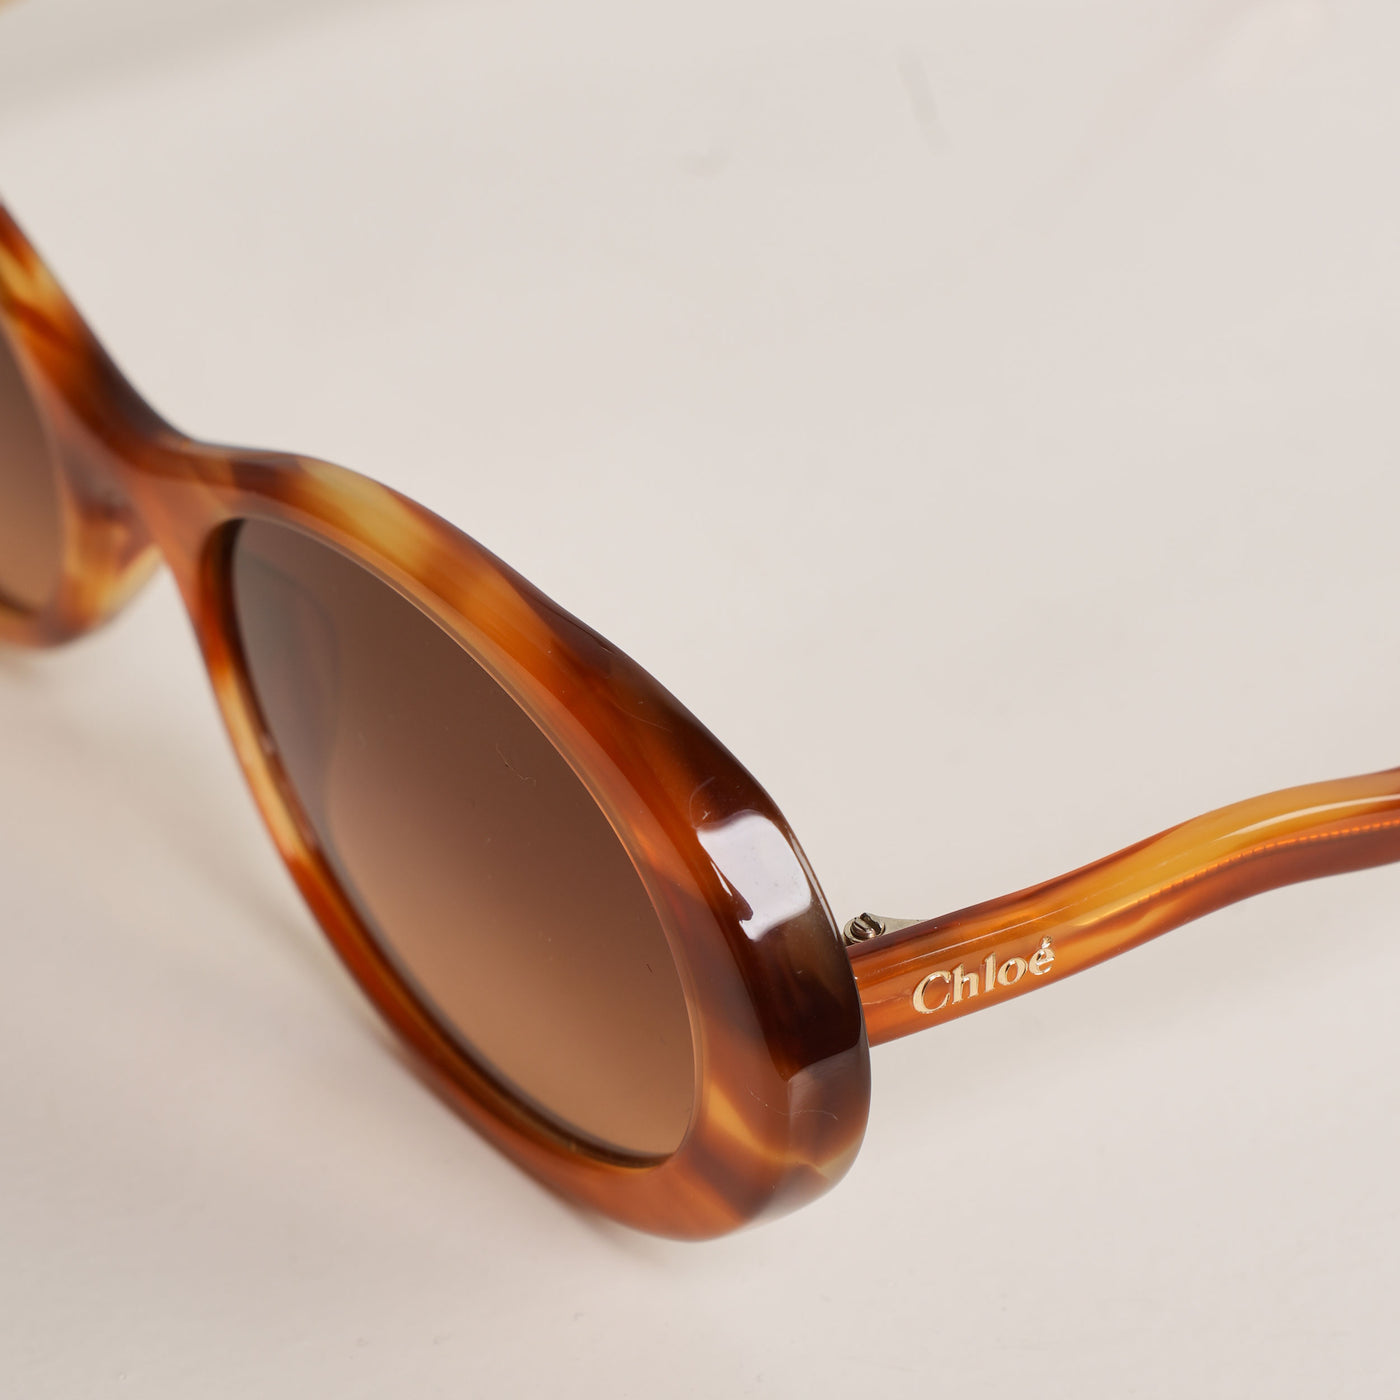 Chloé Zelie Oval Sunglasses  feature the classic oval shape complimented by scalloping on the temples and drop-shape openings embellished with the Chloé logo.